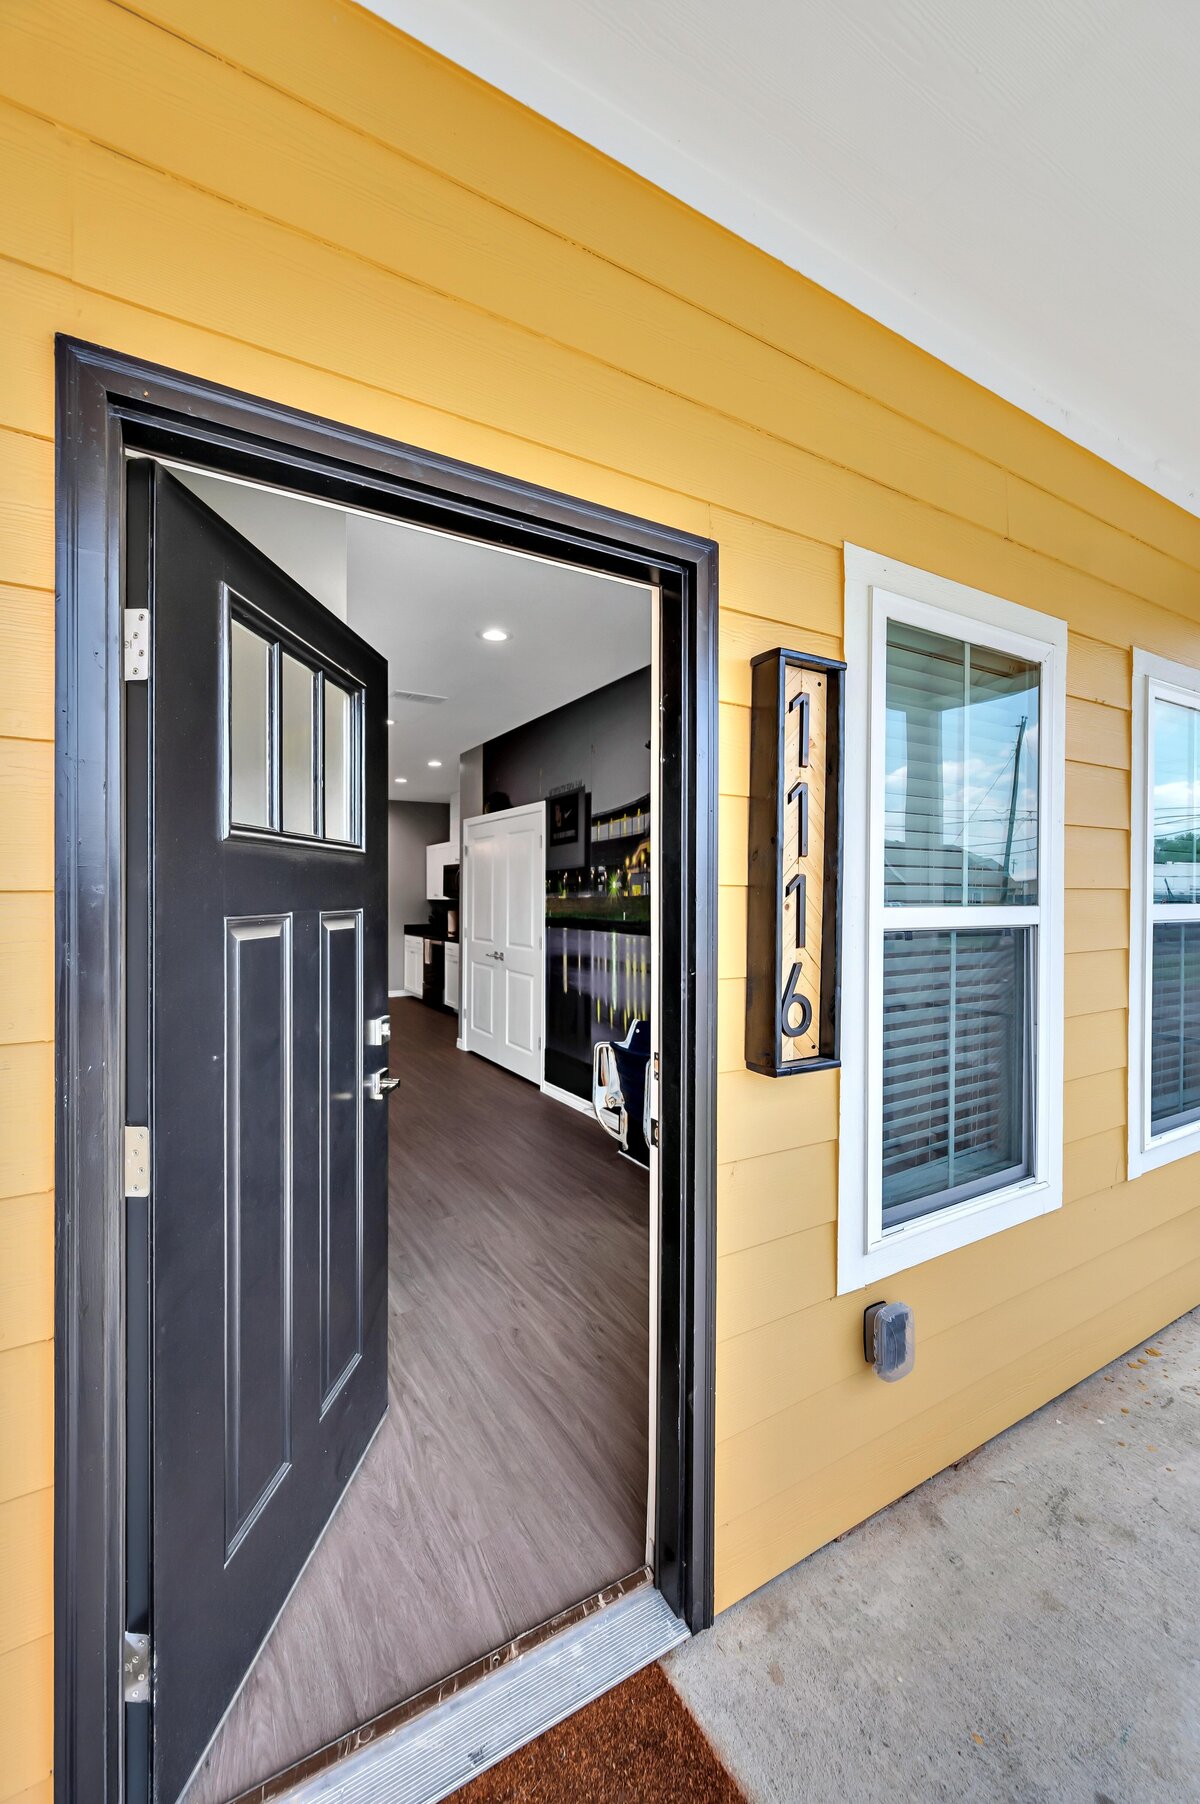 Front door entry way opening up to this four-bedroom, 4.5 bathroom new construction vacation rental house with free wifi, fire pit, gazebo, cornhole, private bathrooms for each bedroom within walking distance of Magnolia and Baylor in downtown Waco, TX.